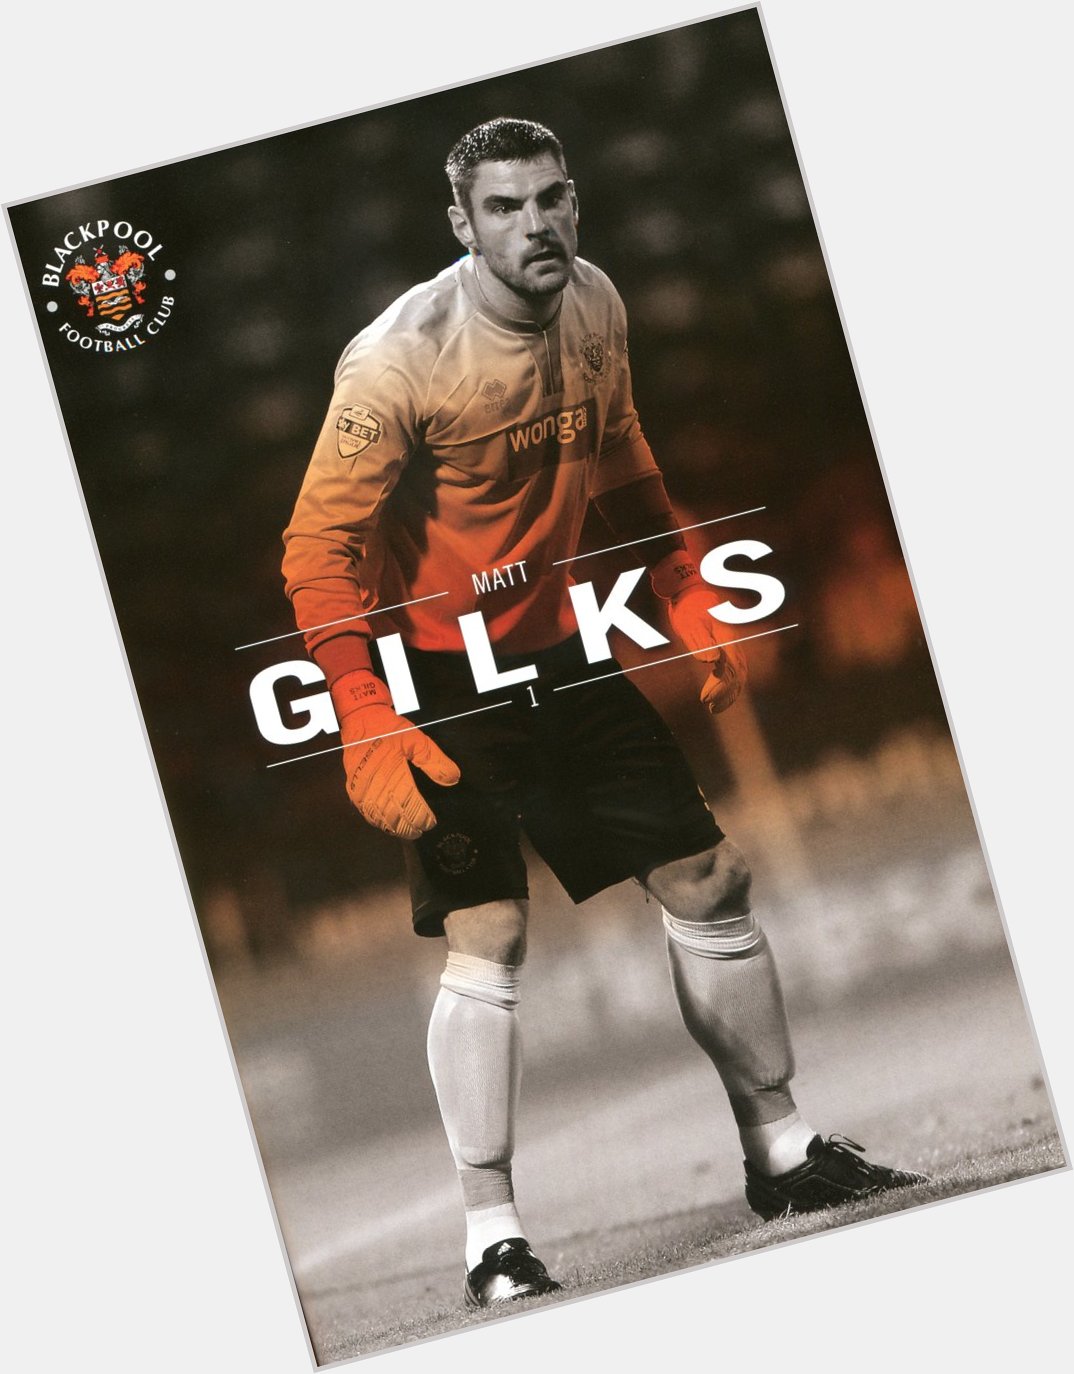 Happy Birthday to former Pool keeper .. Matt Gilks who turns 36 today

Hope you have a great day Gillo !     